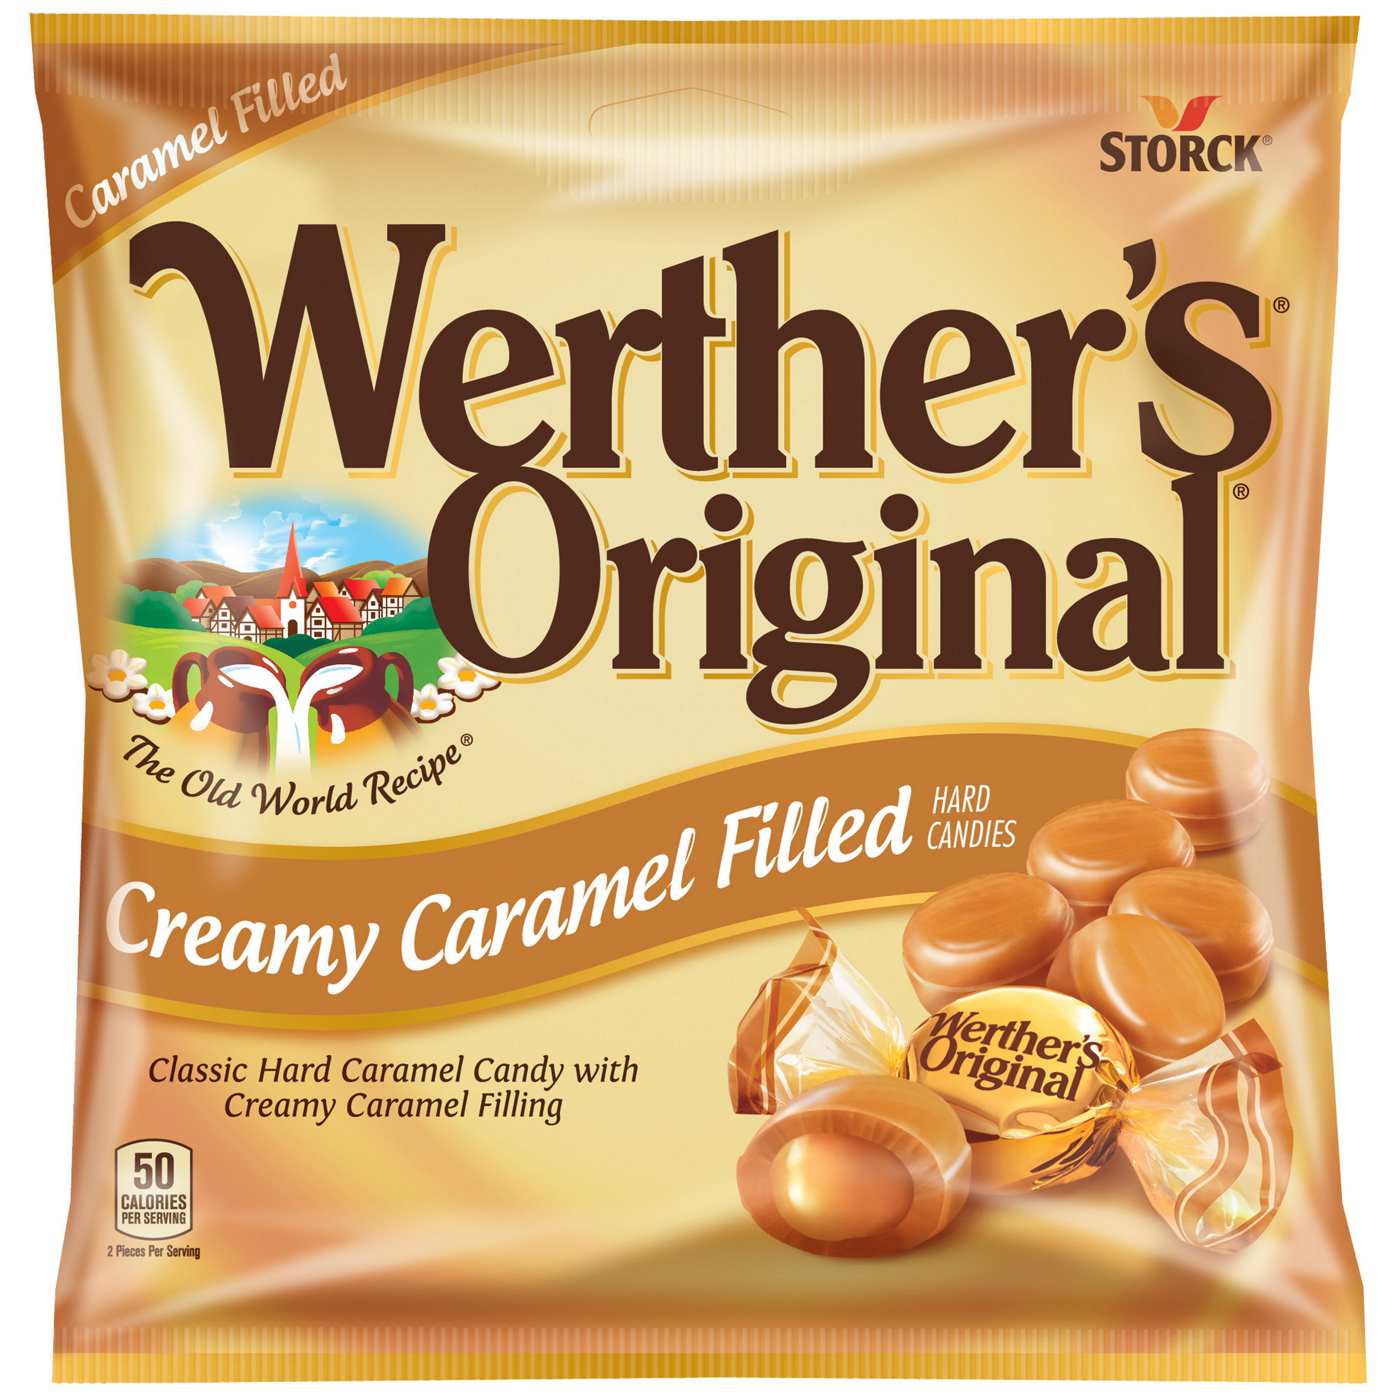 Werther's Original Creamy Caramel Filled Candy; image 1 of 6